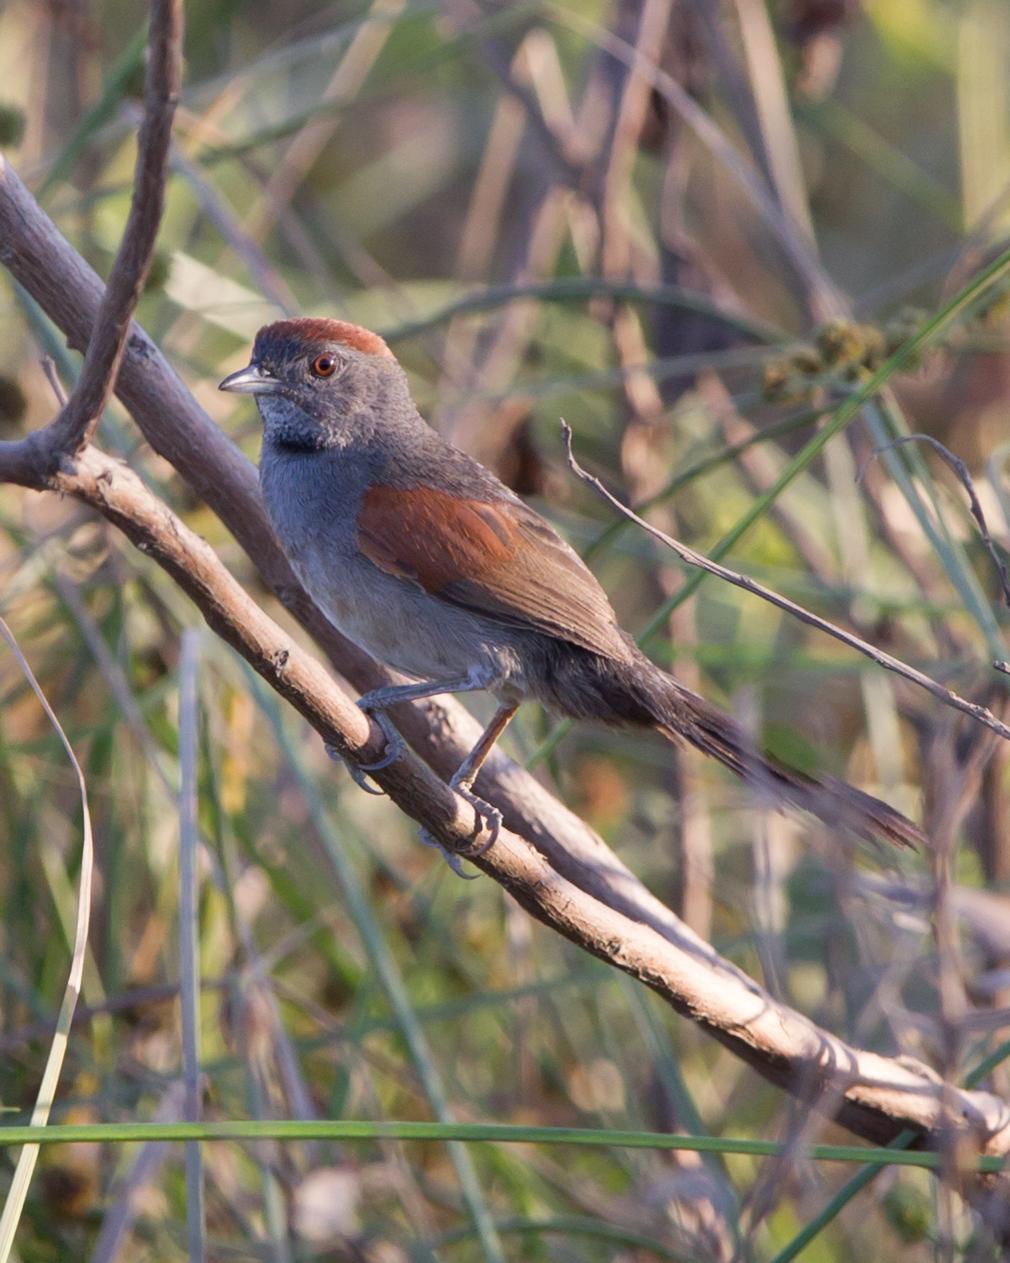 Cinereous-breasted Spinetail Photo by Kevin Berkoff